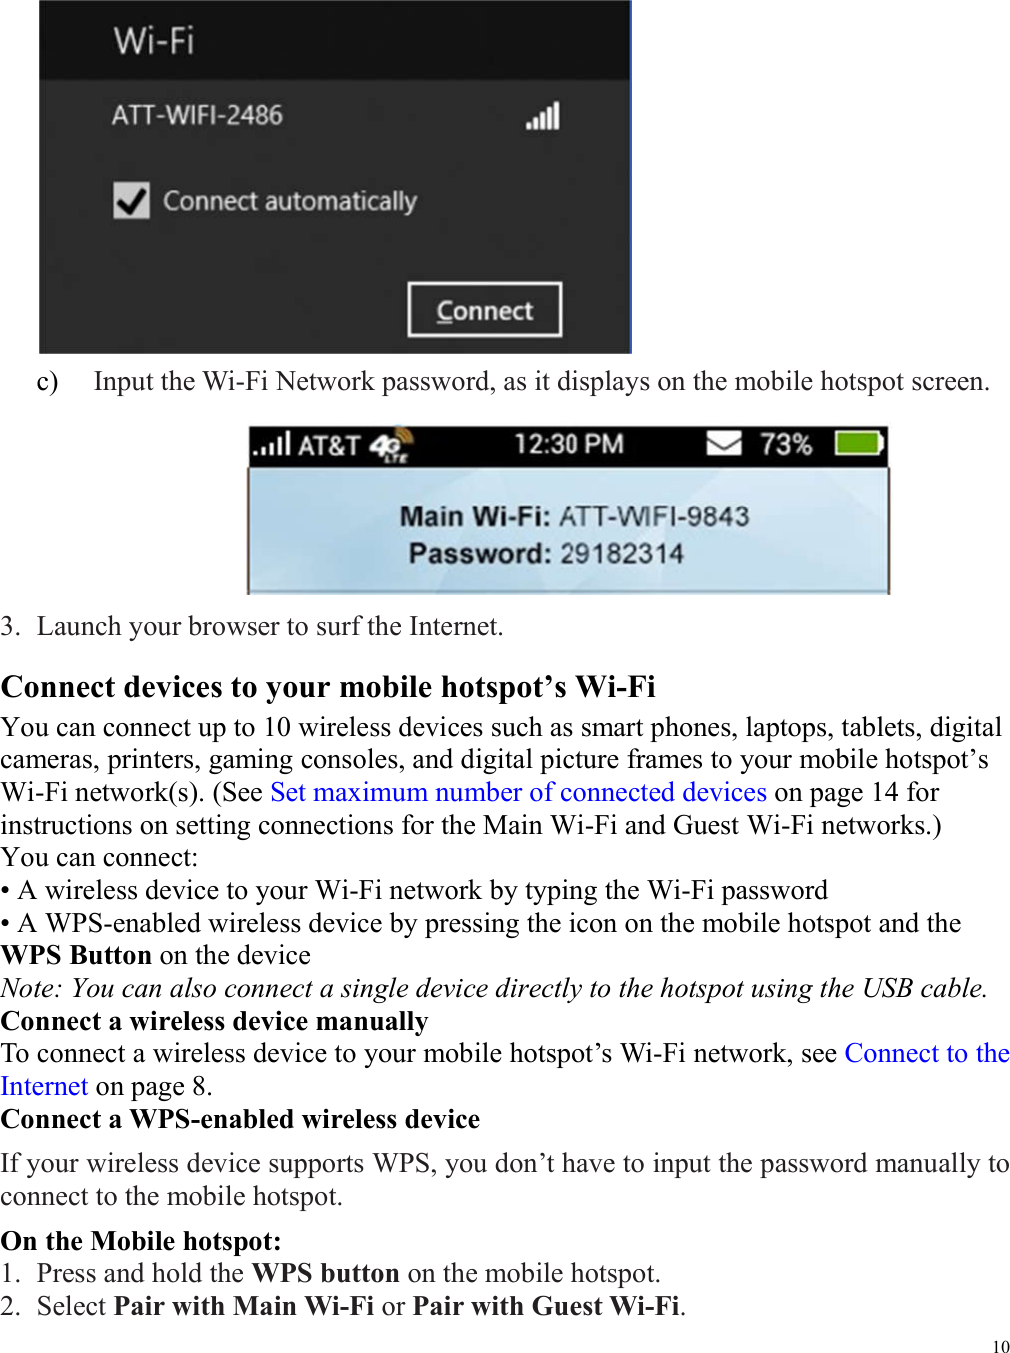 10   c)   Input the Wi-Fi Network password, as it displays on the mobile hotspot screen.    3. Launch your browser to surf the Internet. Connect devices to your mobile hotspot’s Wi-Fi You can connect up to 10 wireless devices such as smart phones, laptops, tablets, digital cameras, printers, gaming consoles, and digital picture frames to your mobile hotspot’s Wi-Fi network(s). (See Set maximum number of connected devices on page 14 for instructions on setting connections for the Main Wi-Fi and Guest Wi-Fi networks.) You can connect:   • A wireless device to your Wi-Fi network by typing the Wi-Fi password • A WPS-enabled wireless device by pressing the icon on the mobile hotspot and the WPS Button on the device Note: You can also connect a single device directly to the hotspot using the USB cable.   Connect a wireless device manually To connect a wireless device to your mobile hotspot’s Wi-Fi network, see Connect to the Internet on page 8. Connect a WPS-enabled wireless device If your wireless device supports WPS, you don’t have to input the password manually to connect to the mobile hotspot. On the Mobile hotspot: 1. Press and hold the WPS button on the mobile hotspot. 2. Select Pair with Main Wi-Fi or Pair with Guest Wi-Fi. 